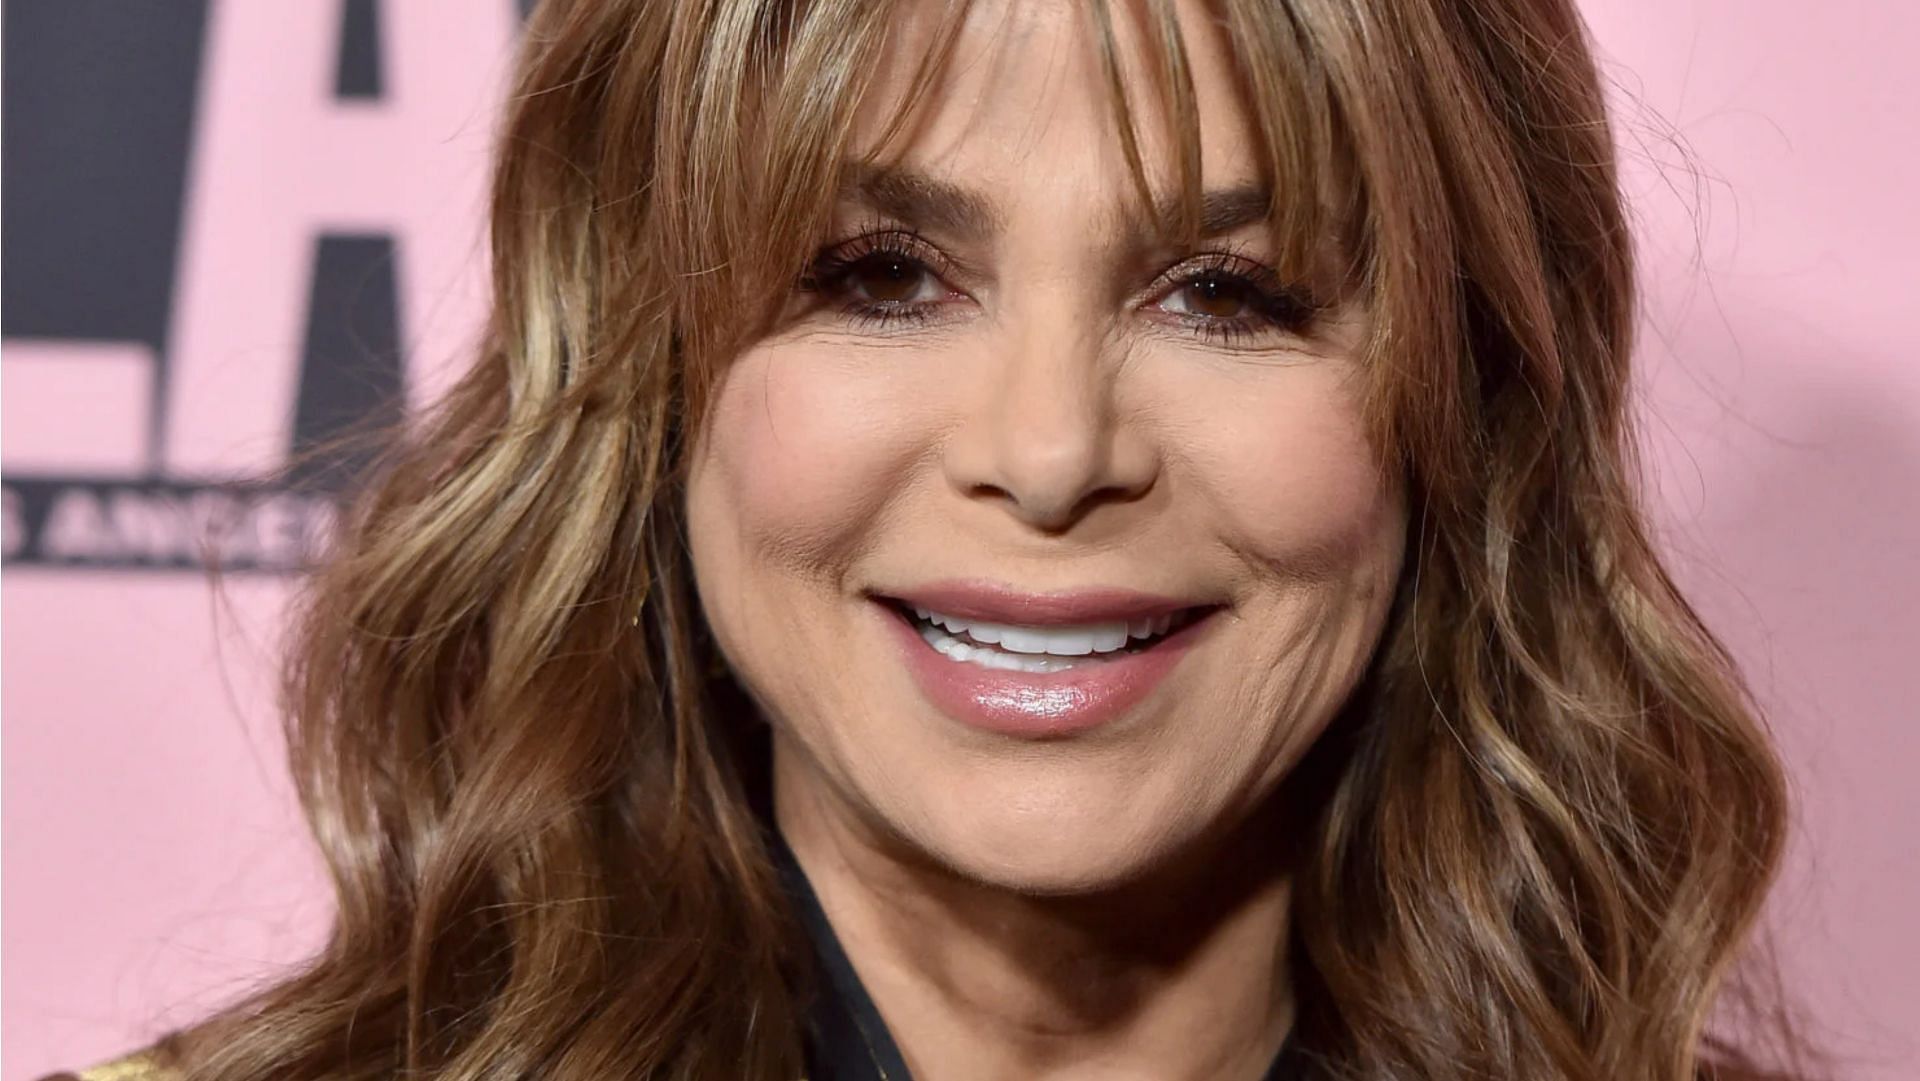 Paula Abdul have previously admitted to having undergone surgeries. (Image via Axelle/Bauer-Griffin/Getty)